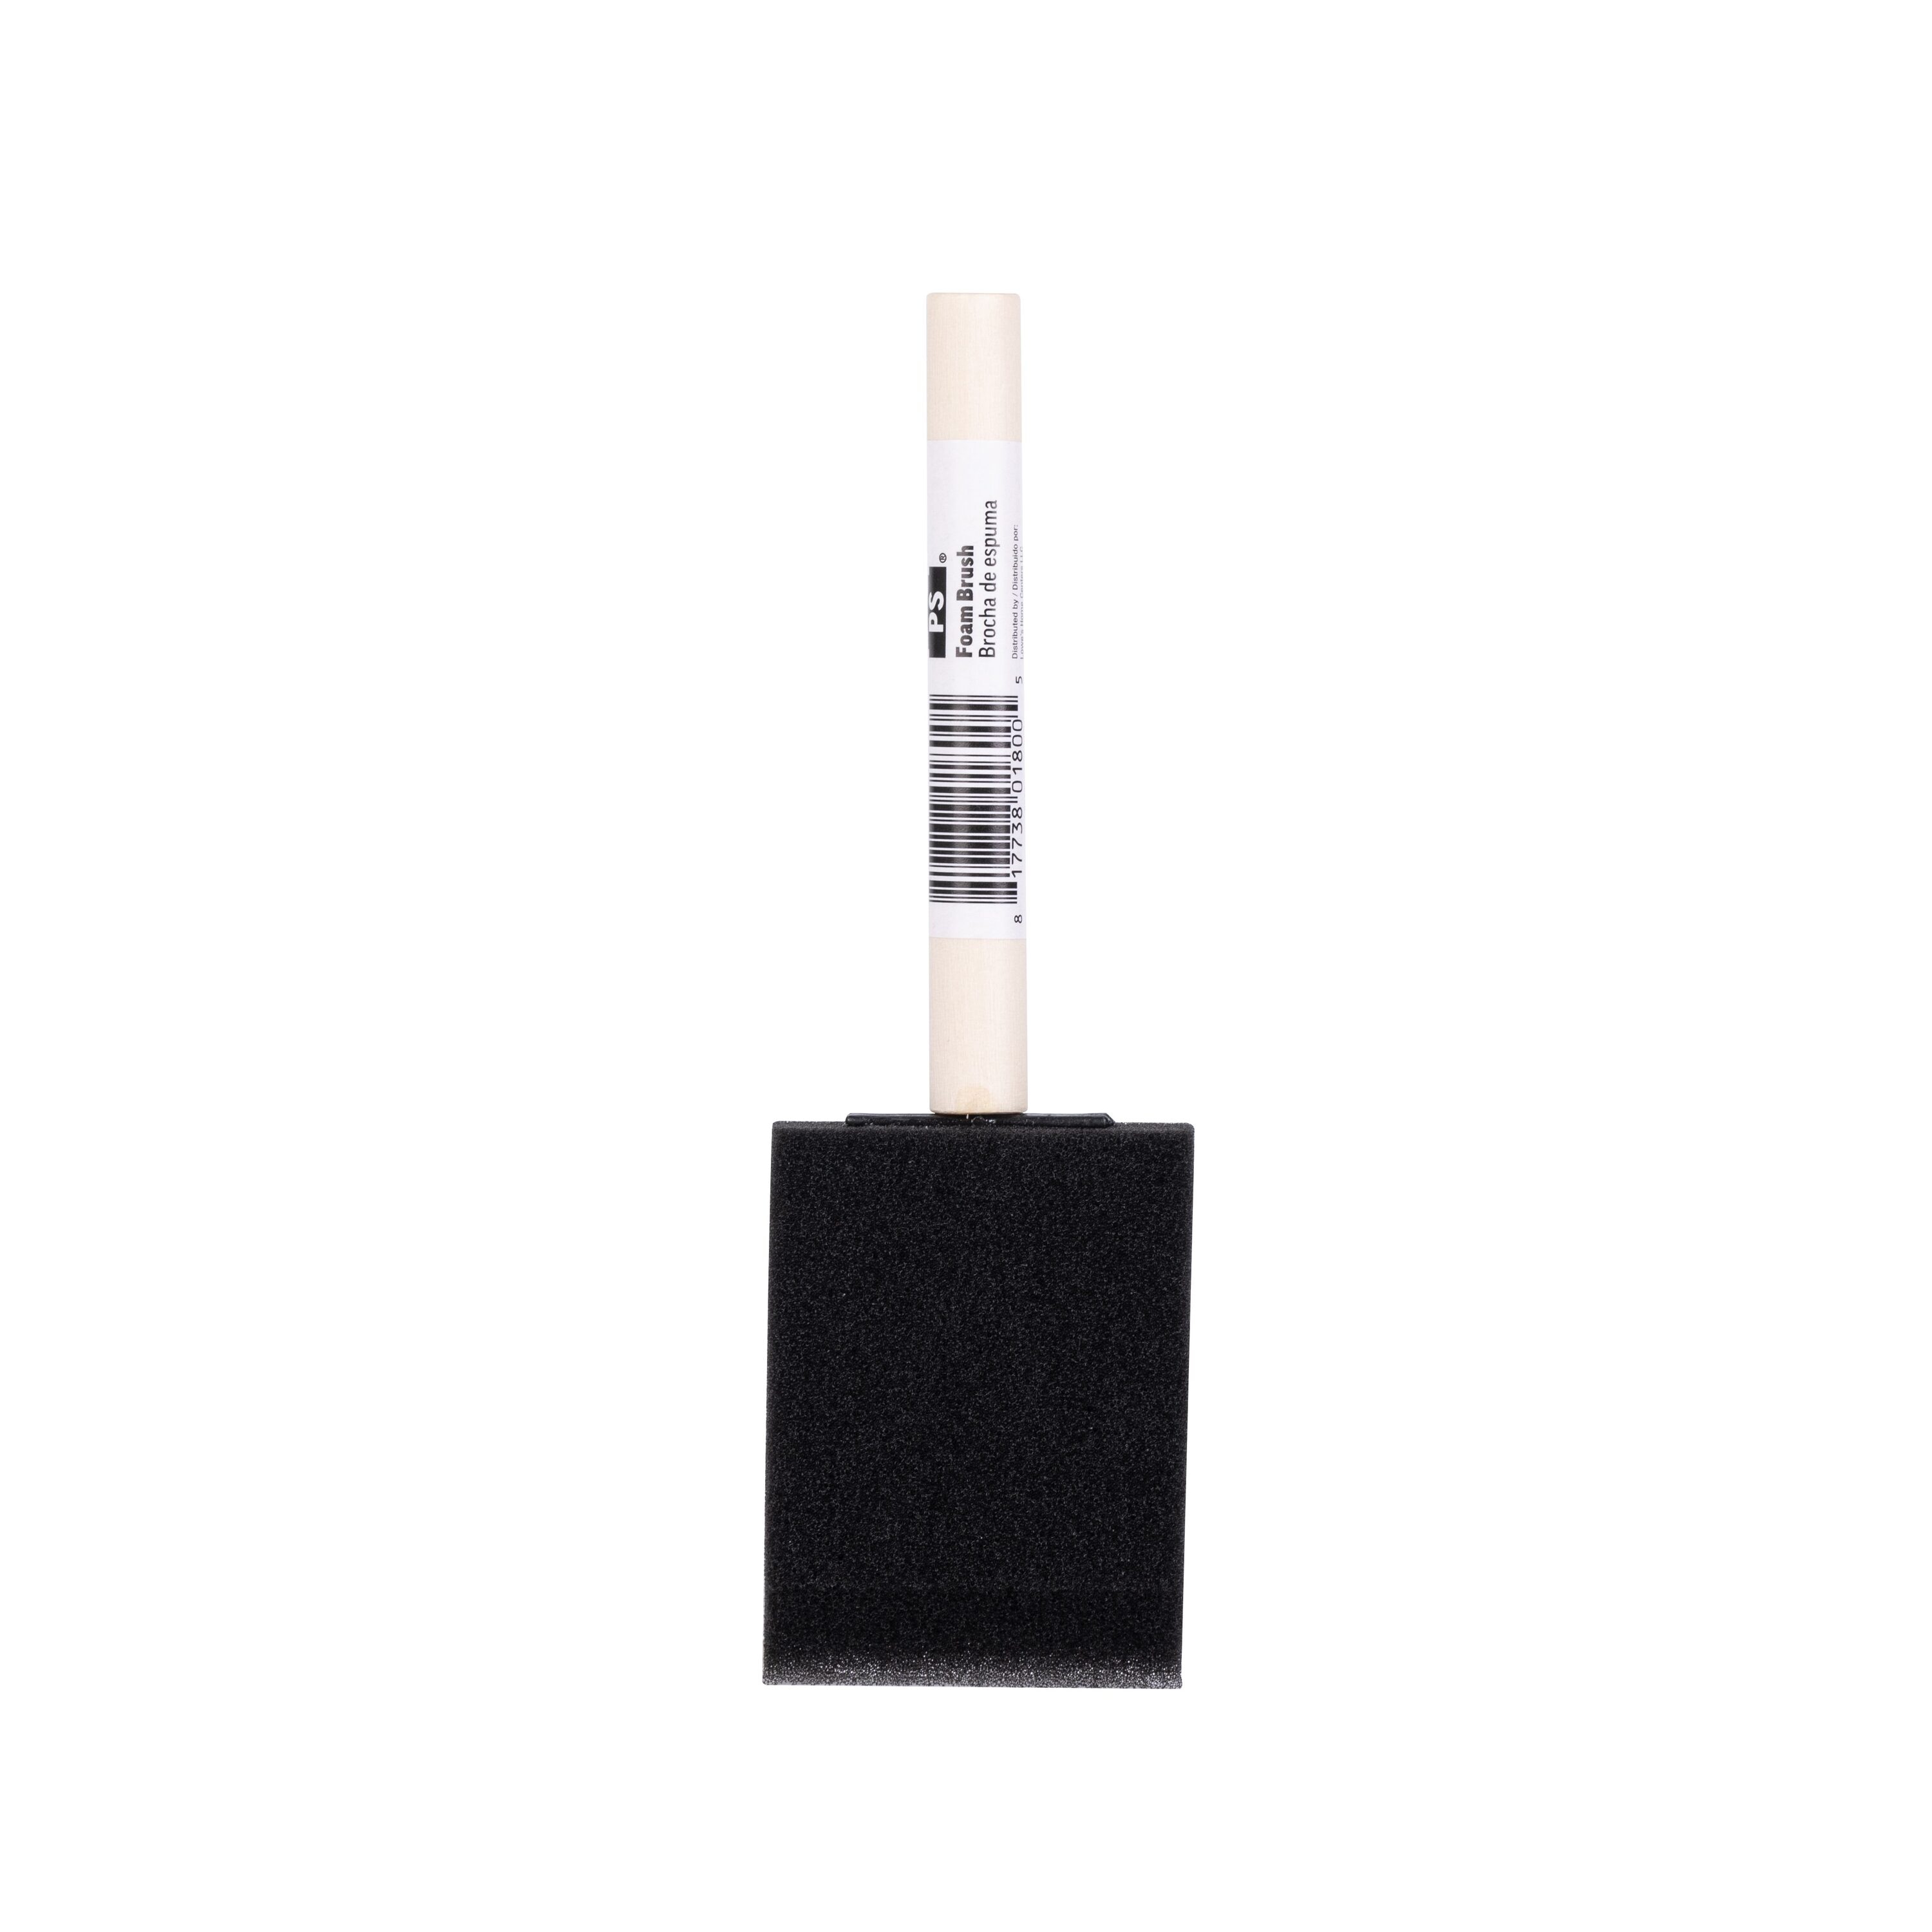 1 inch Foam Brush 24 Pack for Painting Staining Varnishing and General Finishing Projects Made in The USA